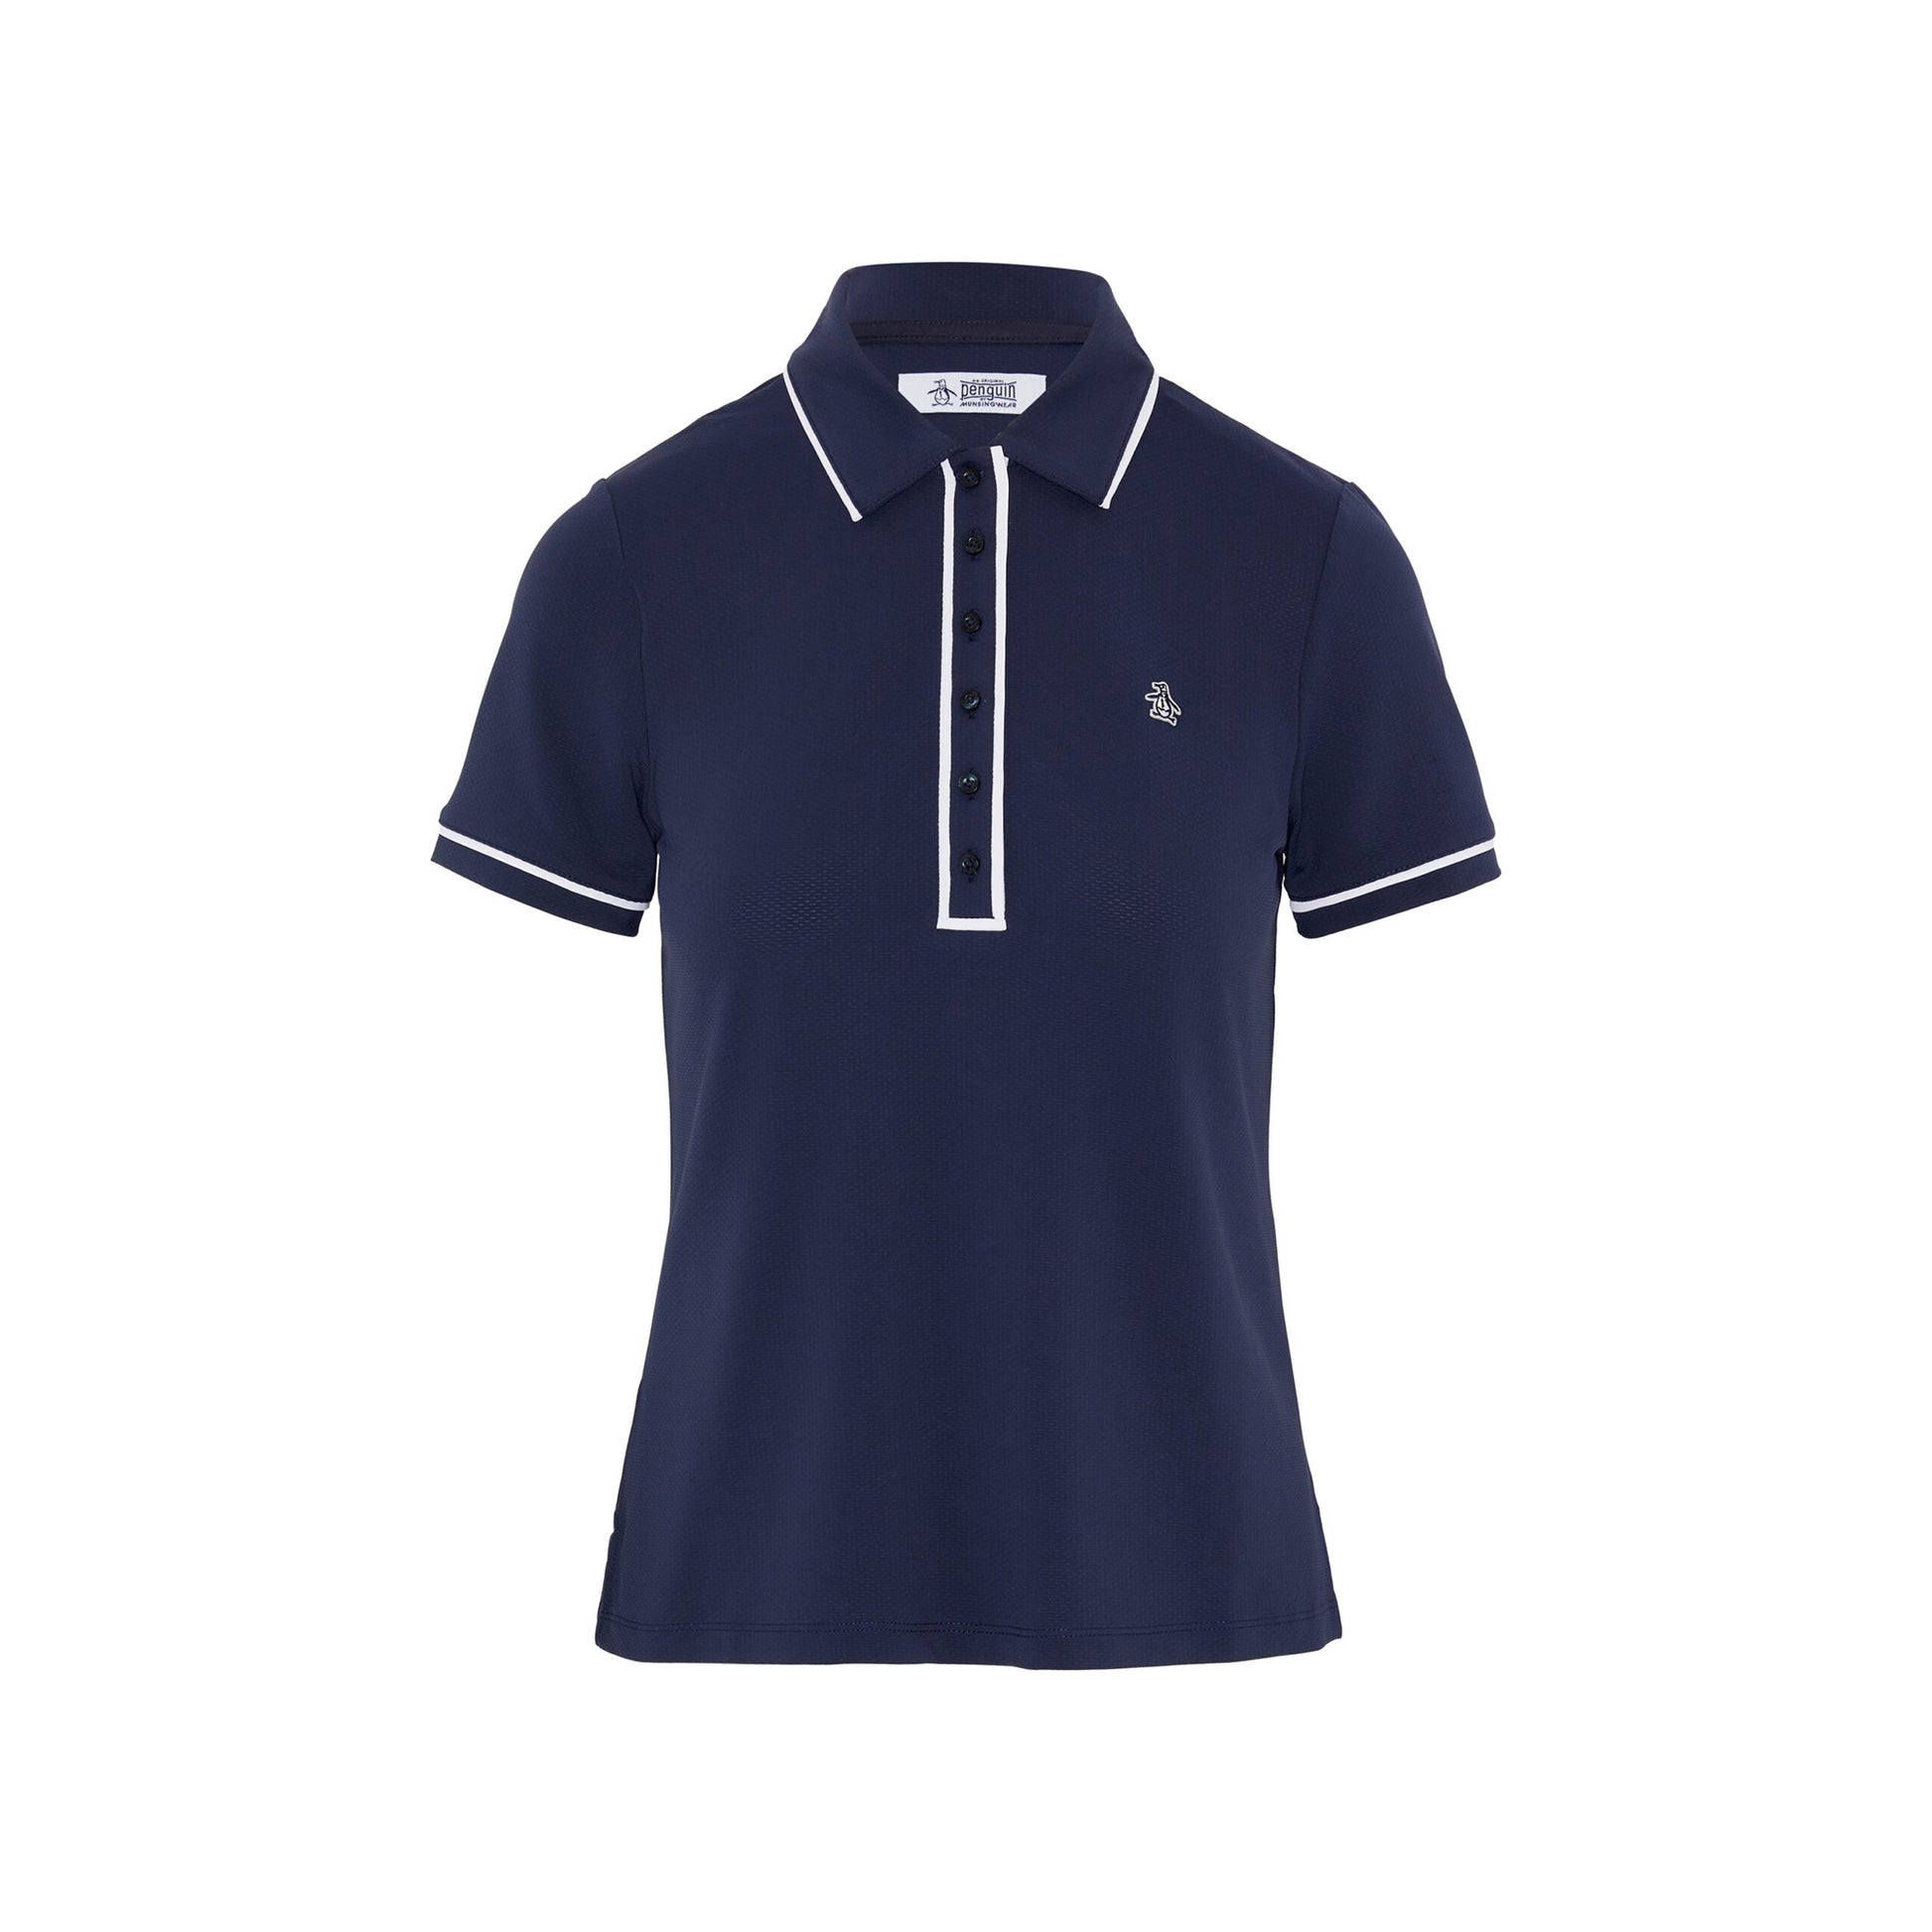 Original Penguin Women's Short Sleeve Polo with Contrast Piping in Navy